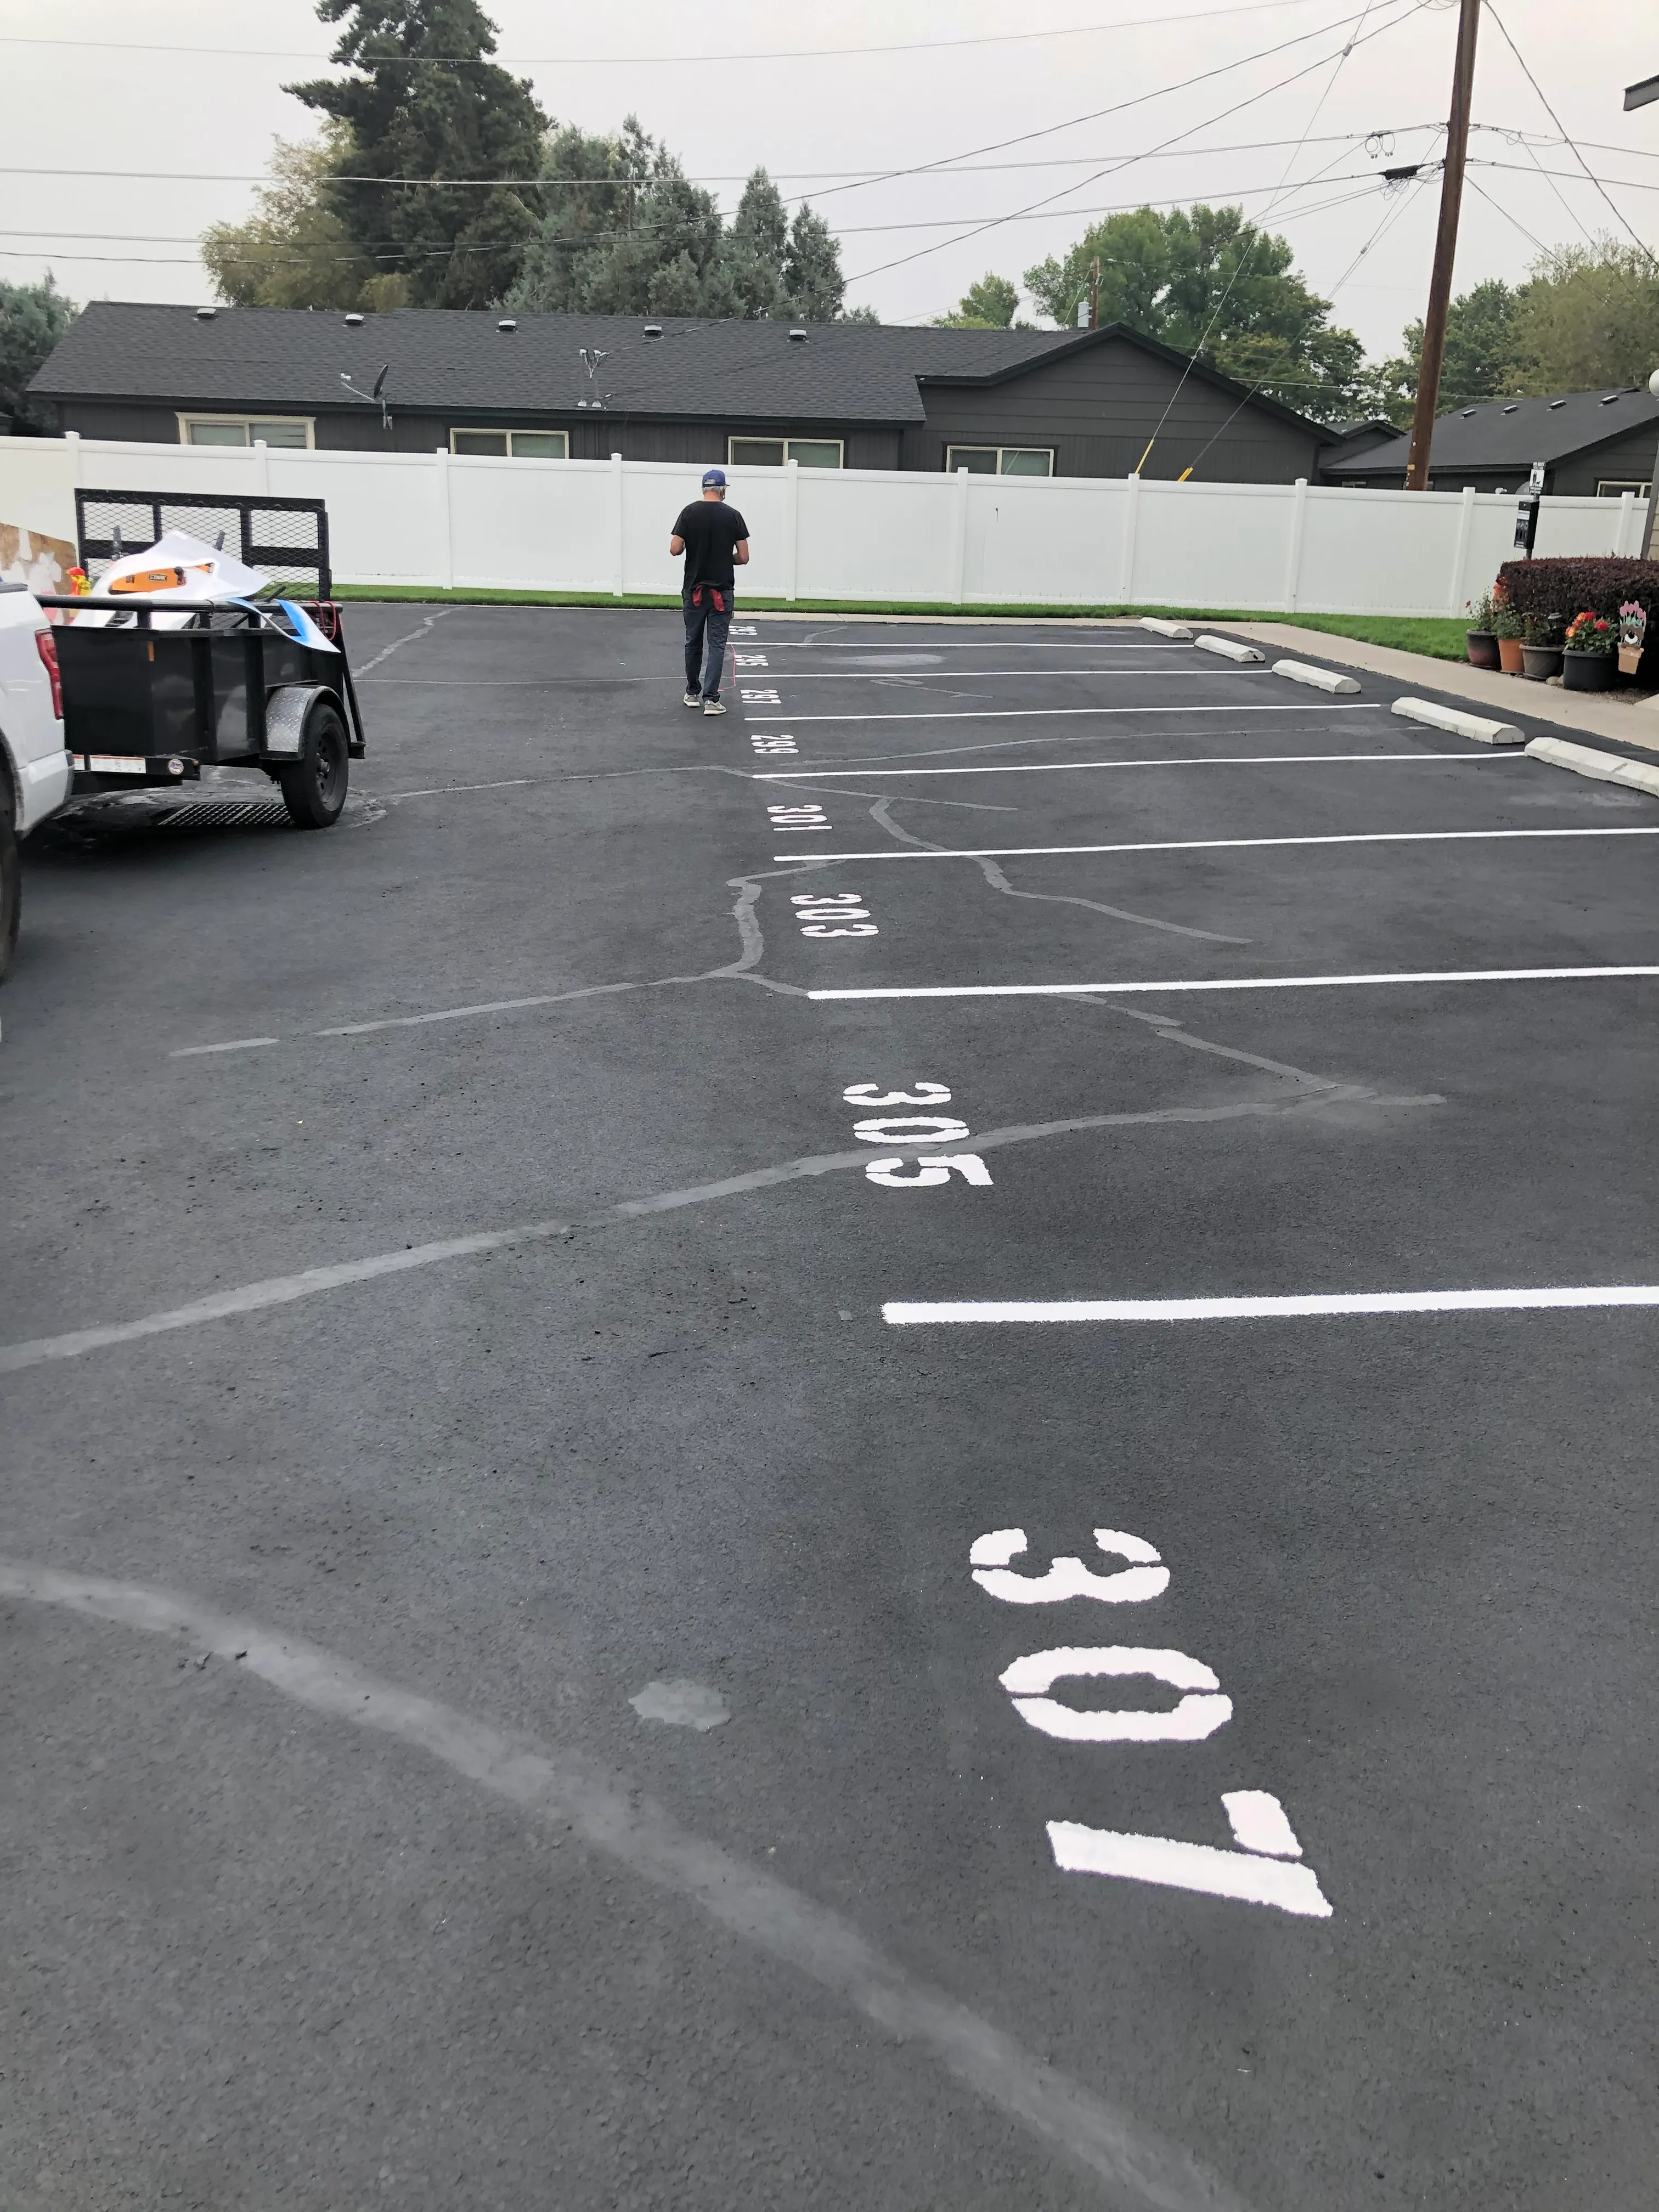 Parking Lot Sealcoating for Pacific Sealcoating in Bend, OR